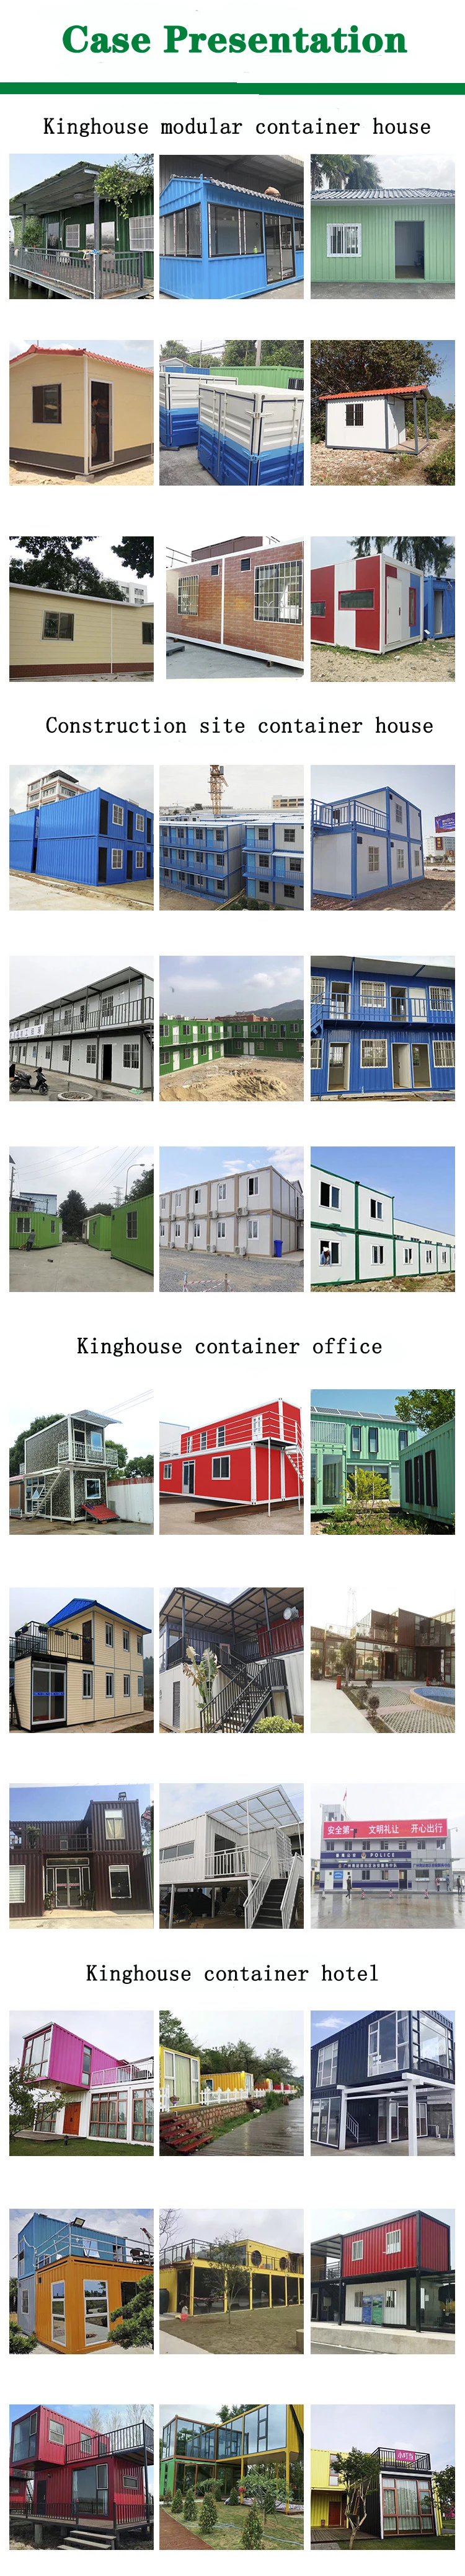 Detachable Movable Container Houses